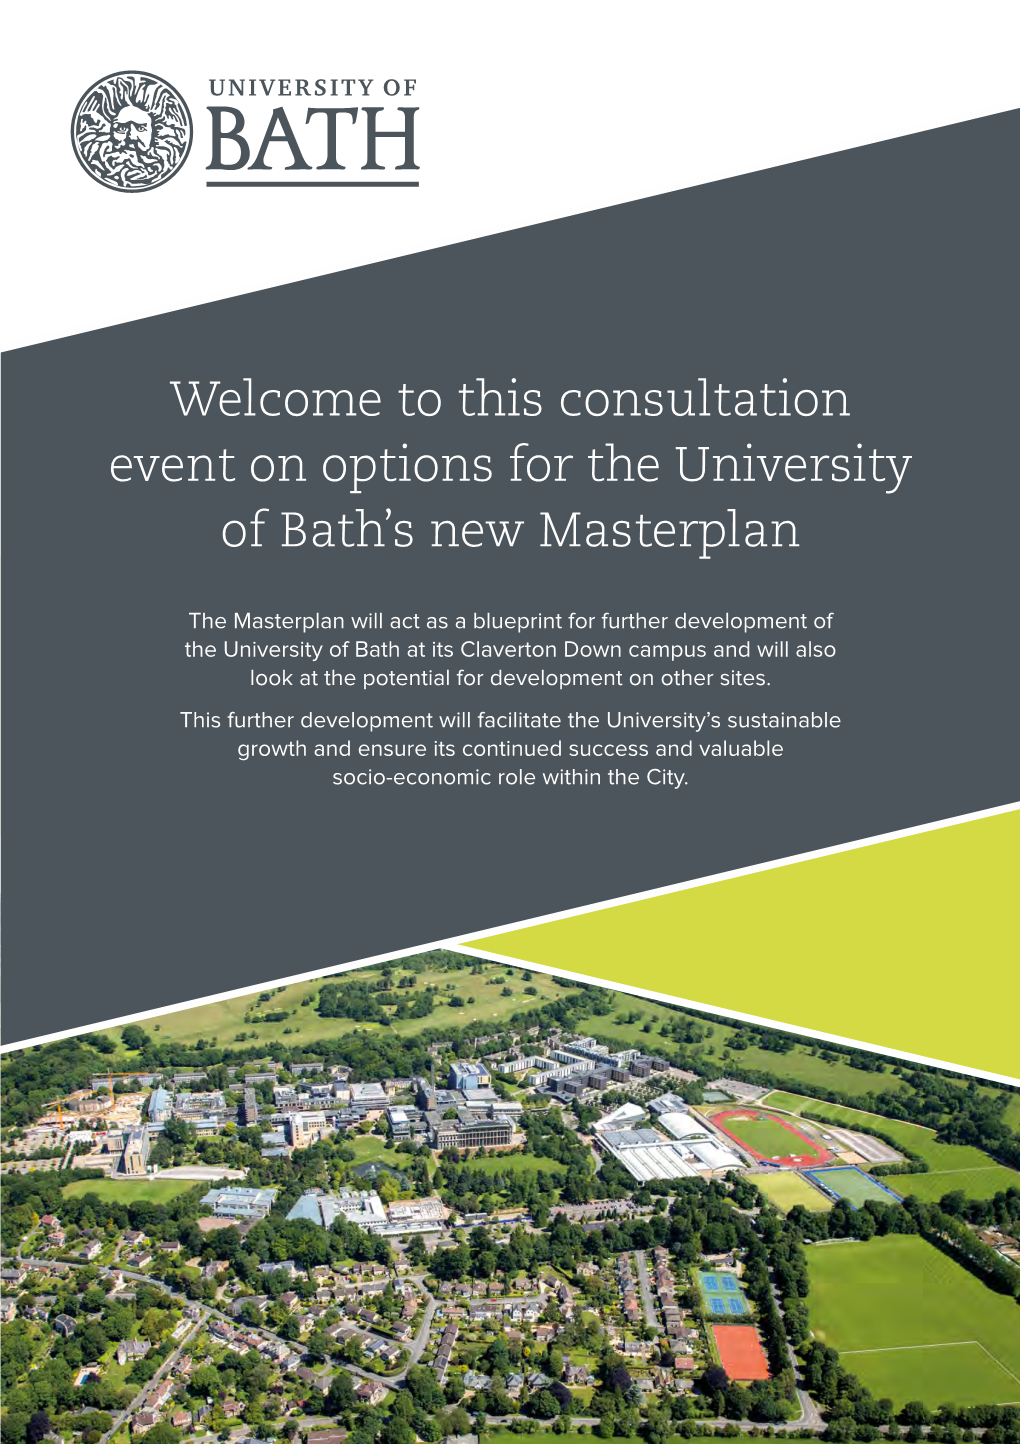 The Masterplan Will Act As a Blueprint for Further Development of The